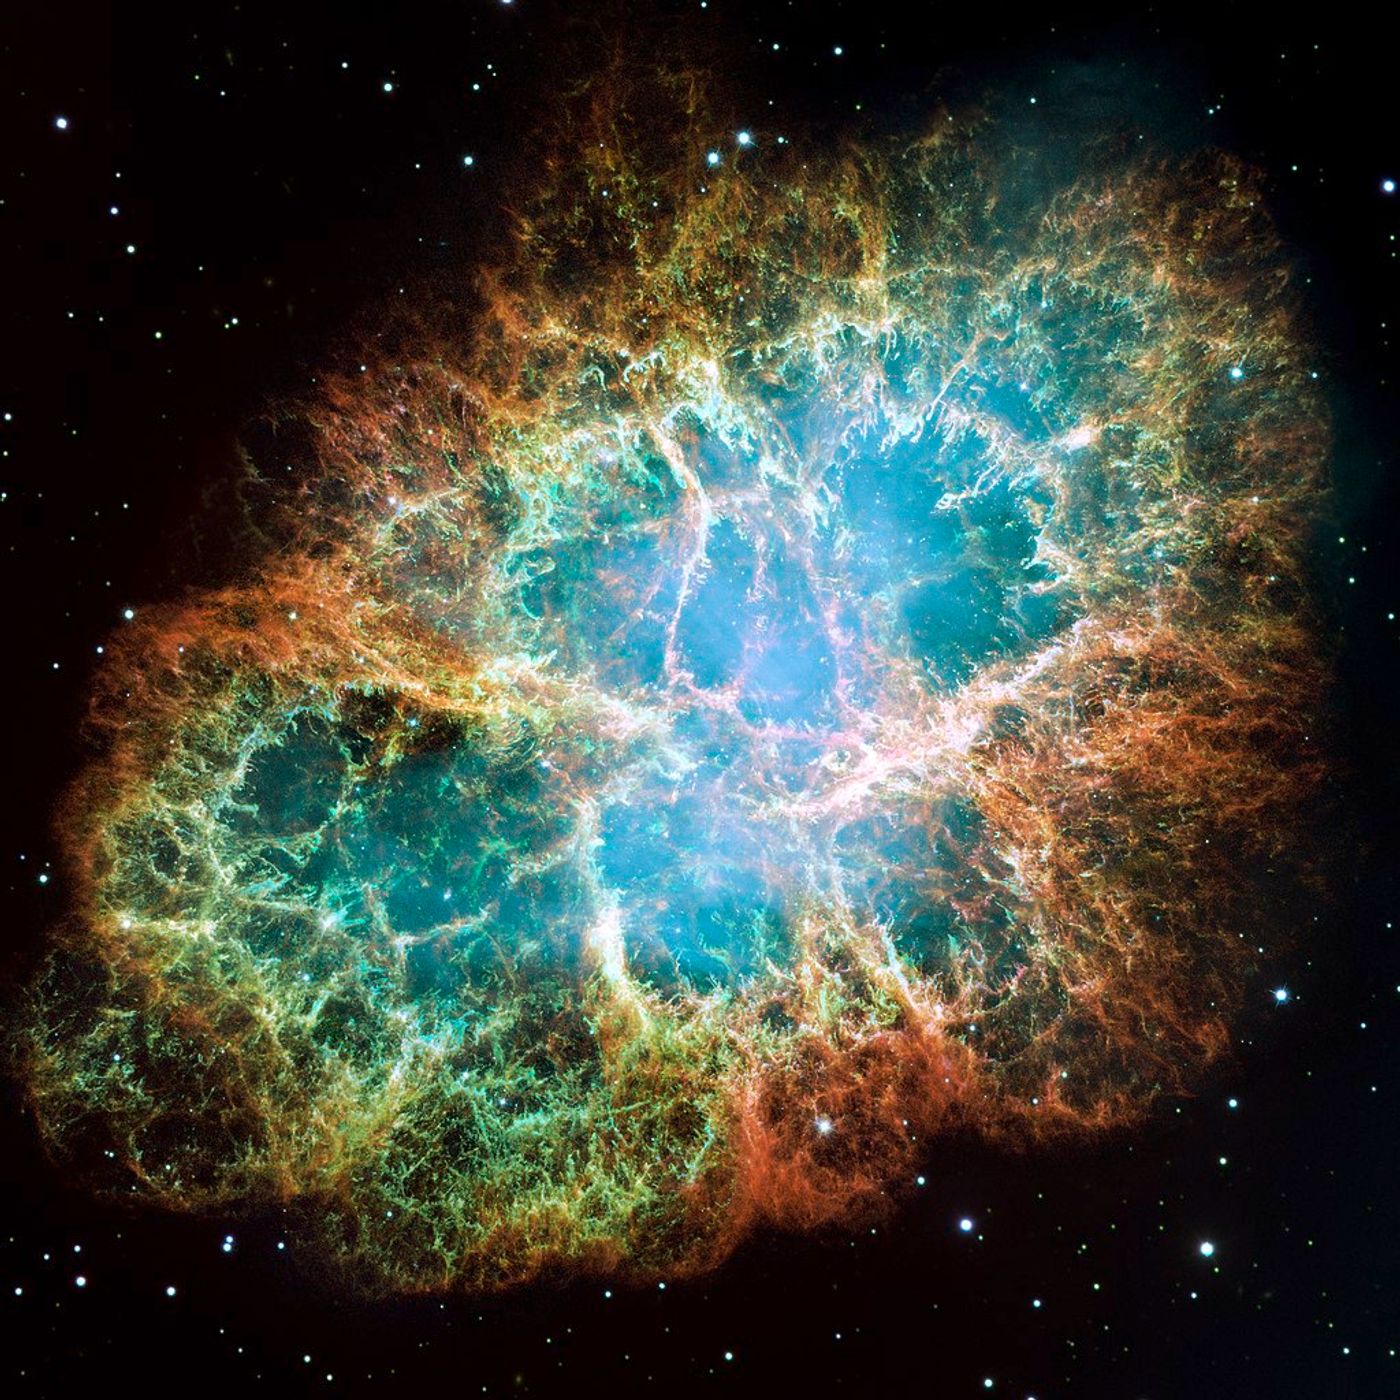 Image of the supernova remnant, Crab Nebula, which lies approximately 6,700 light-years from Earth. (Credit: NASA, ESA, J. Hester and A. Loll (Arizona State University))